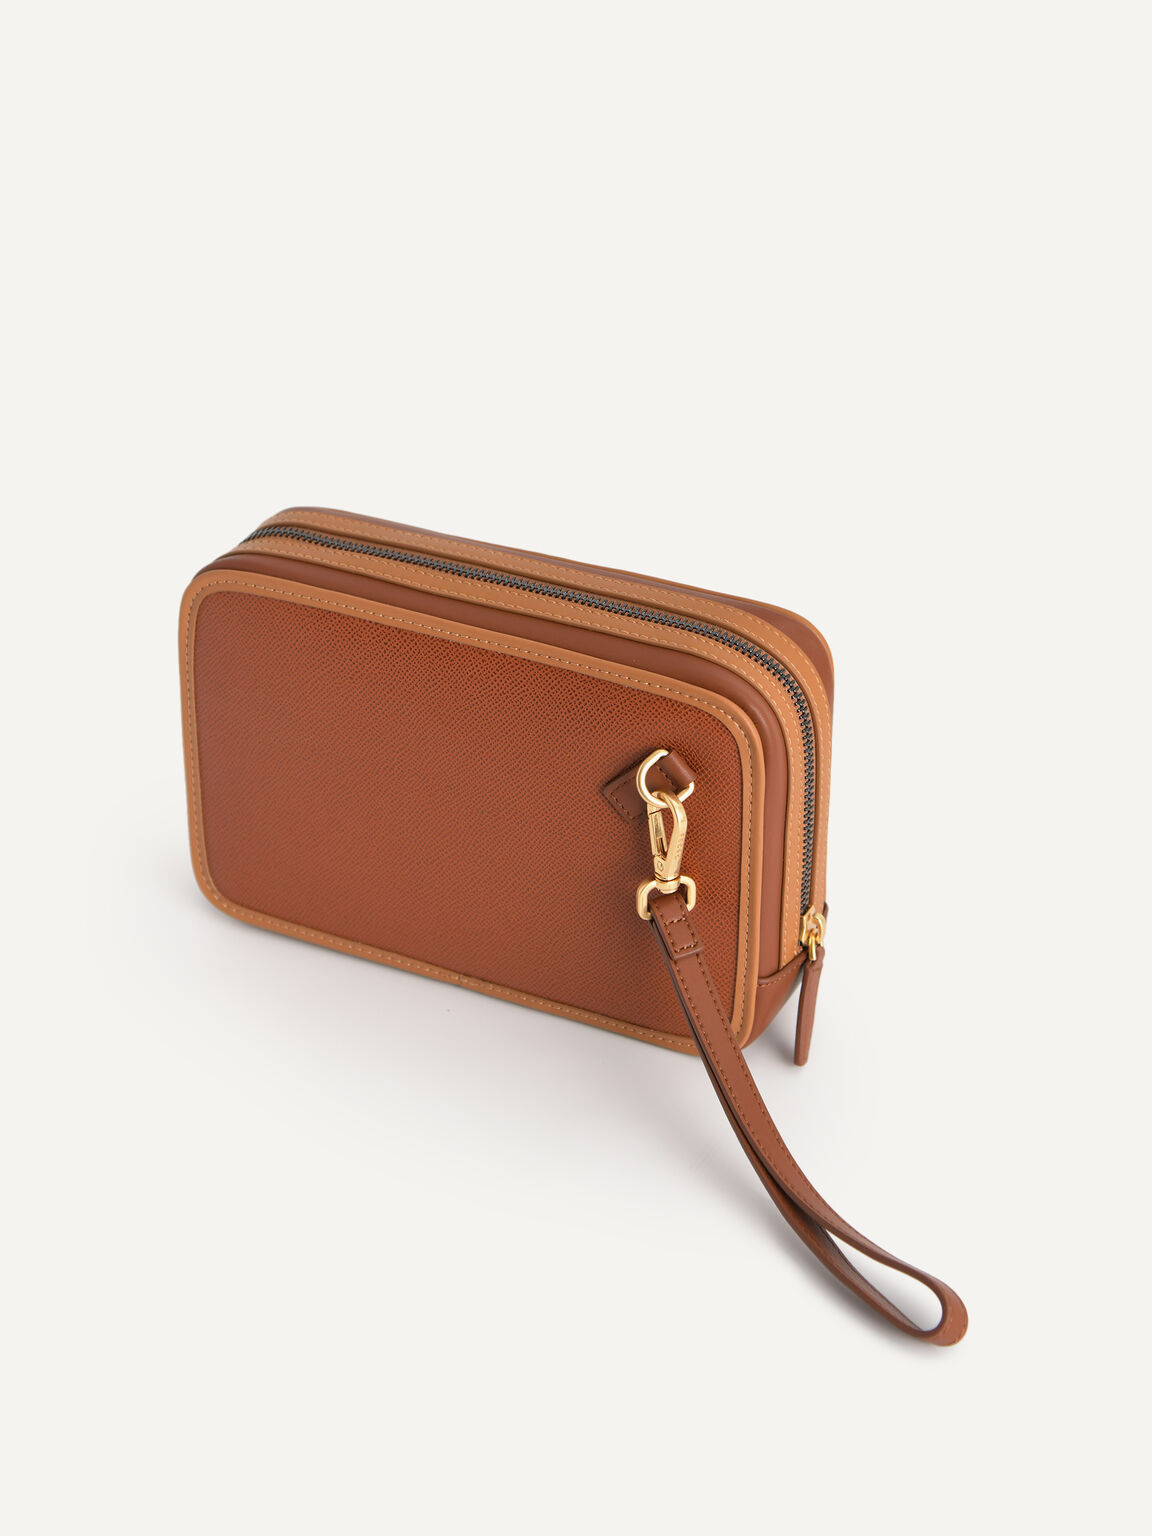 Buckled Textured Leather Clutch, Cognac